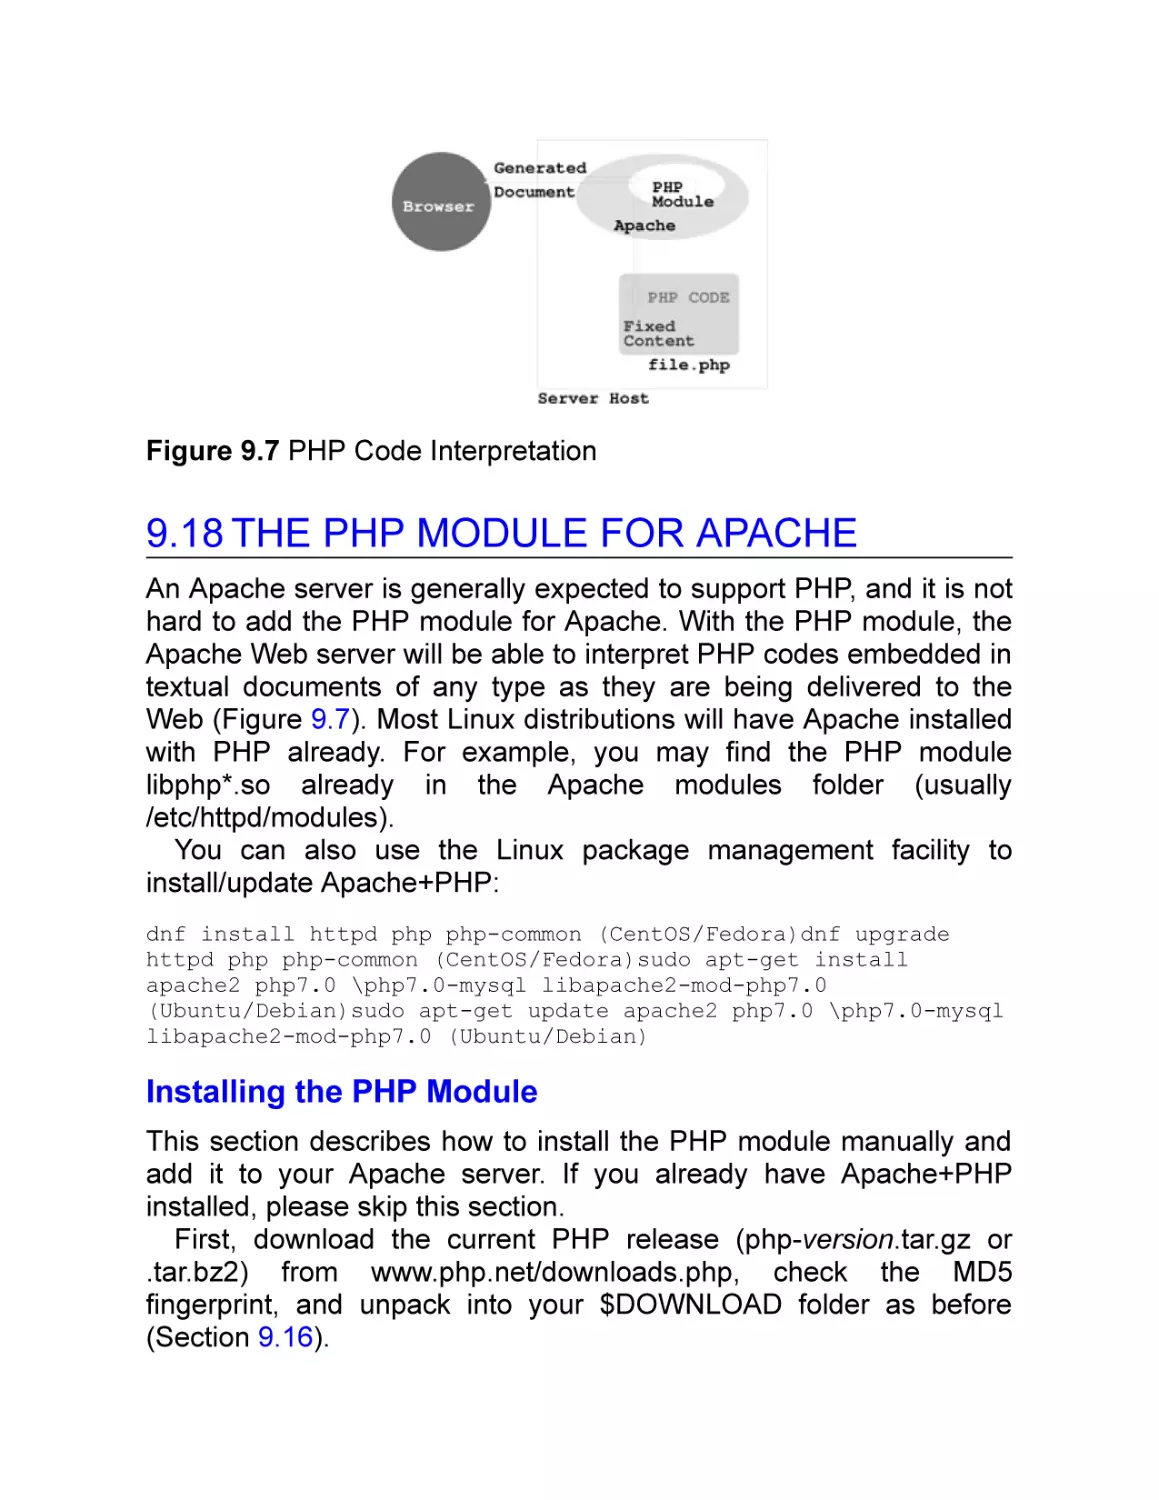 9.18 The PHP Module for Apache
Installing the PHP Module